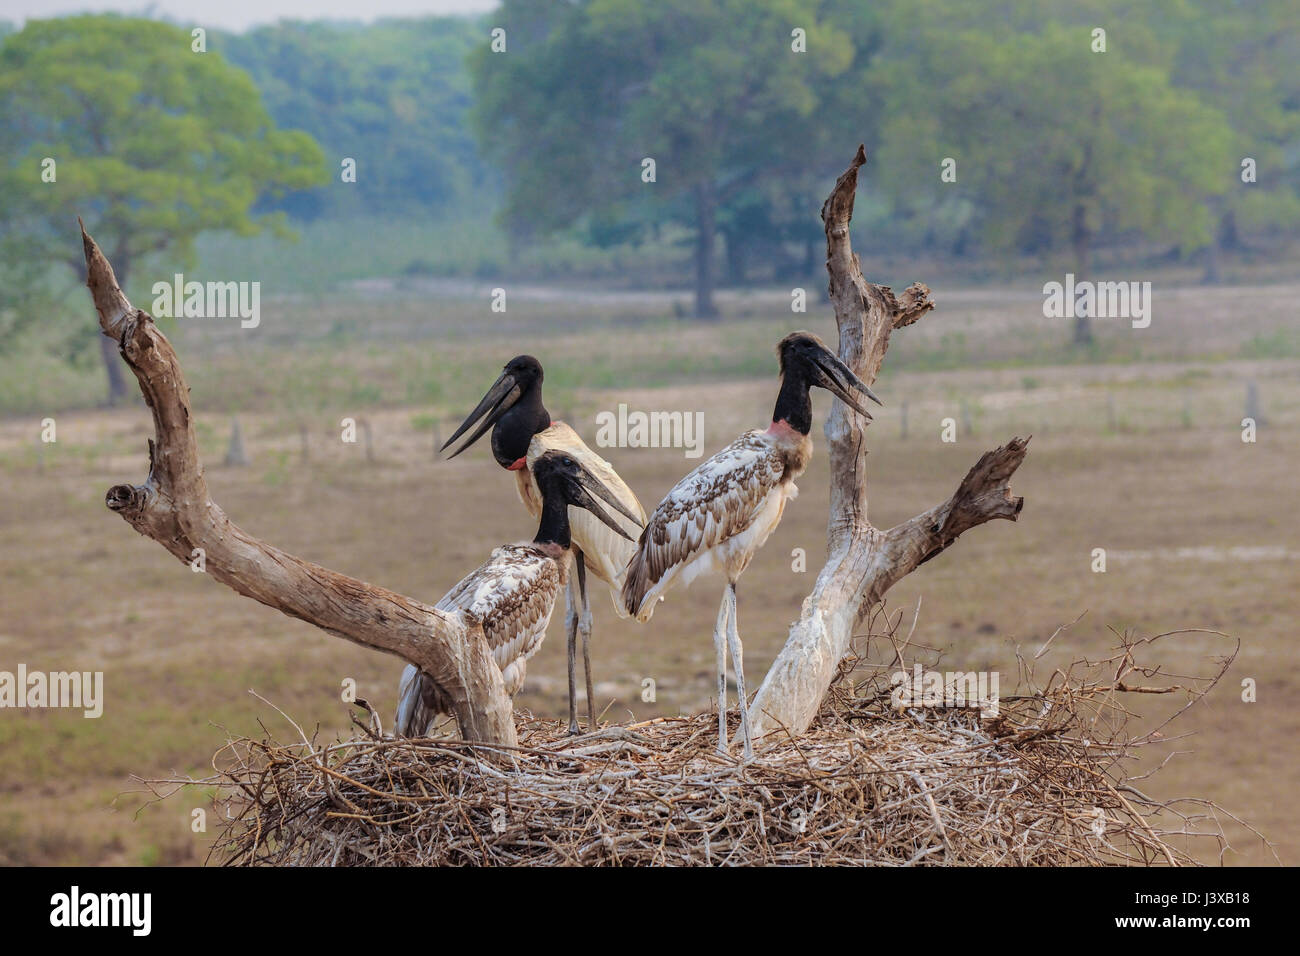 An adult and two young Jabiru storks at their nest, Pantanal, Brazil Stock Photo